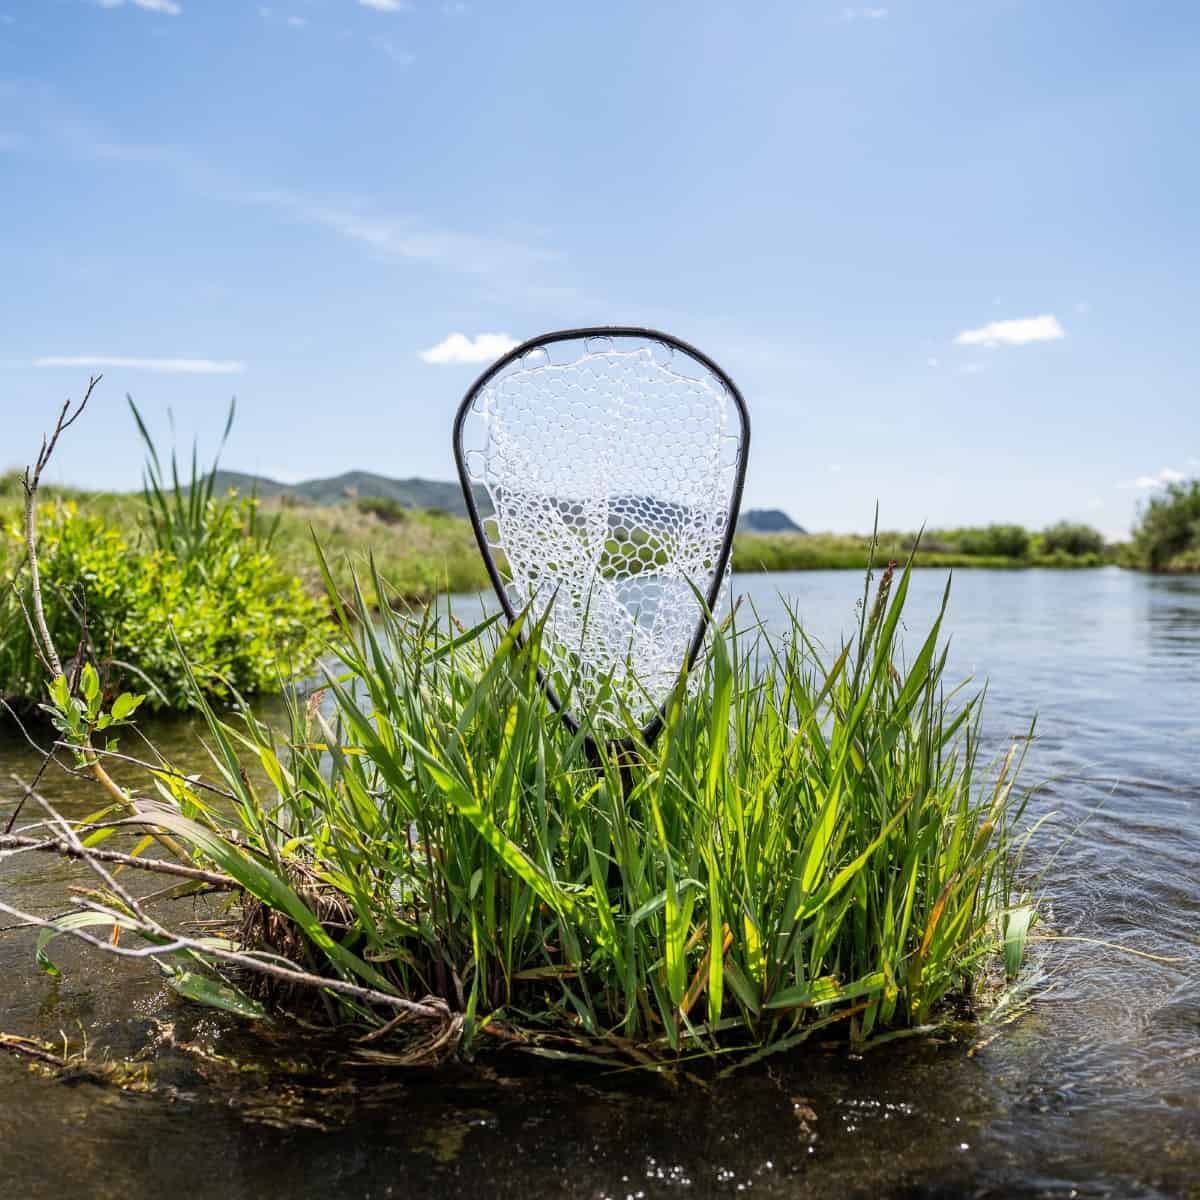 NCN 816332016240 Fishpond Nomad Canyon Fly Fishing Net Floating In River